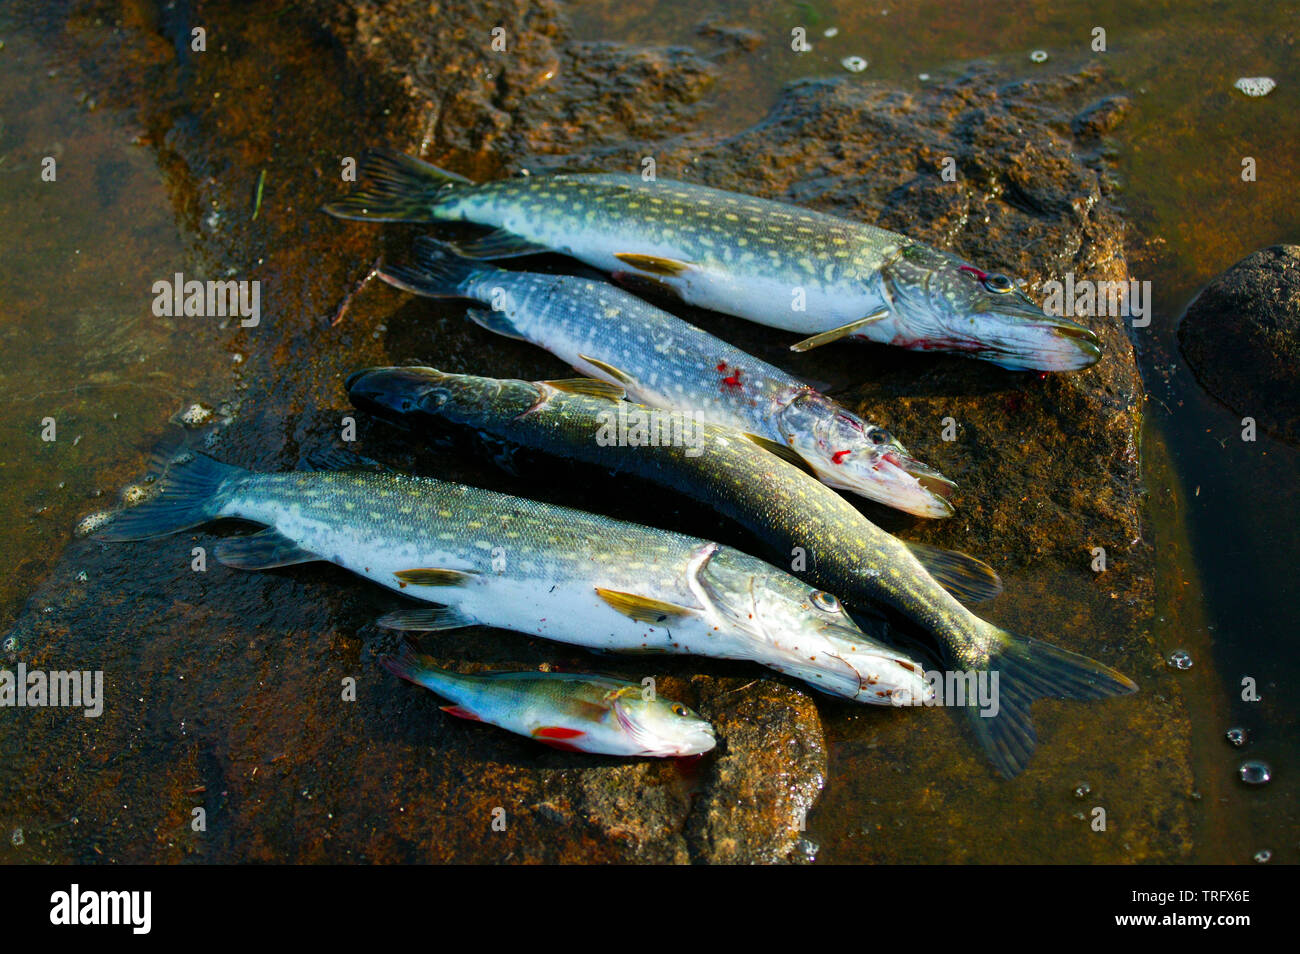 Four northern pike, Esox lucius, and one common perch, Perca fluviatilis, caught in the lake Vansjø in Østfold, Norway. The lake Vansjø and its surrounding lakes and rivers are a part of the water system called Morsavassdraget. September, 2006. Stock Photo